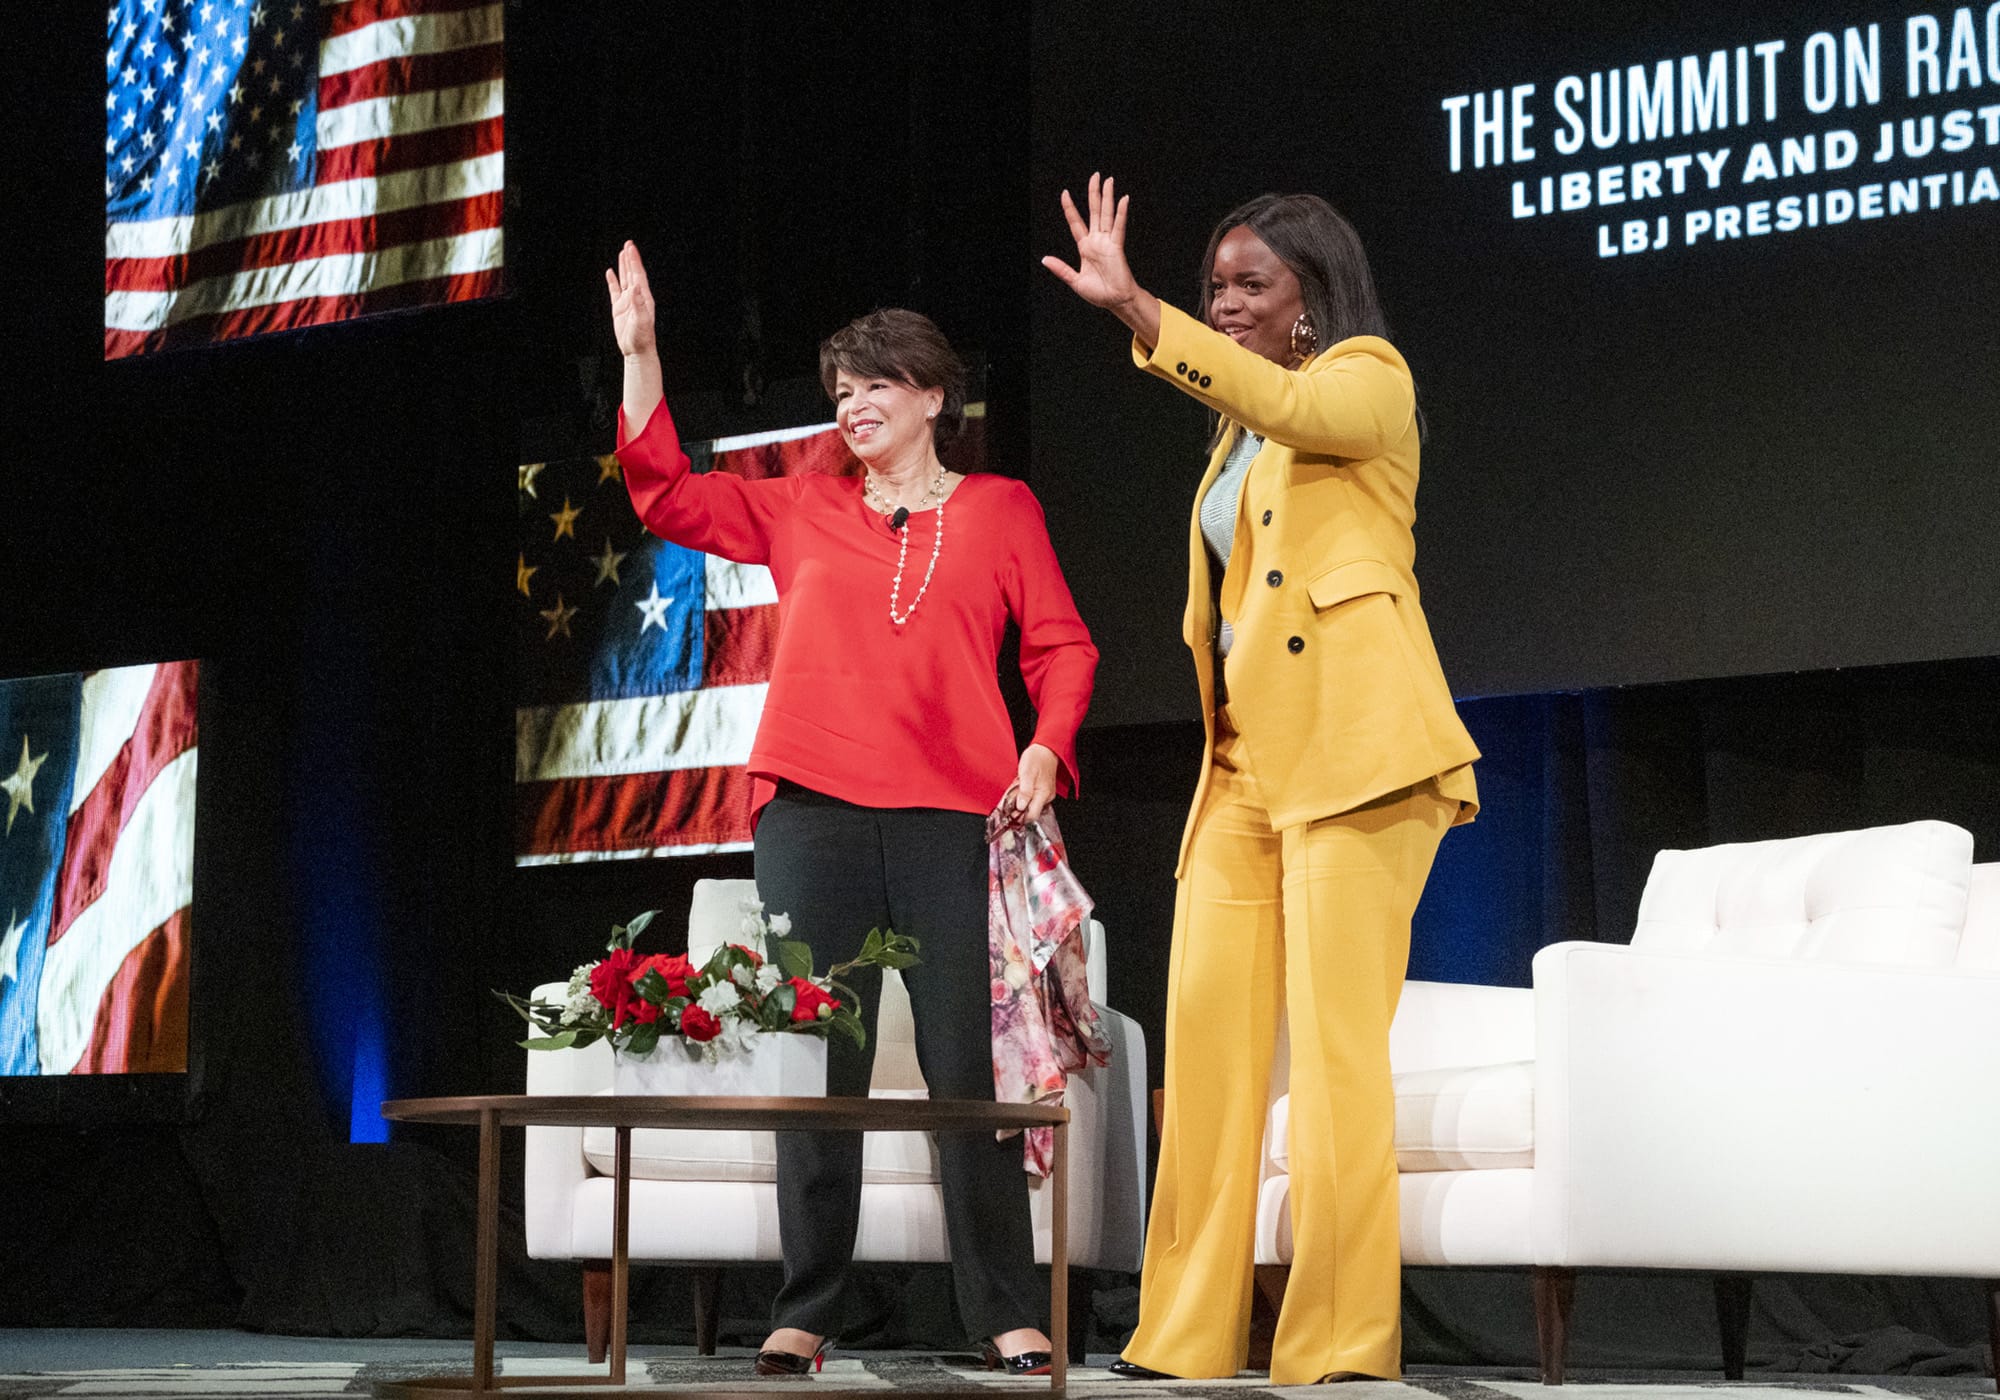 Valerie Jarrett and Brittany Packnett wave to the audience.